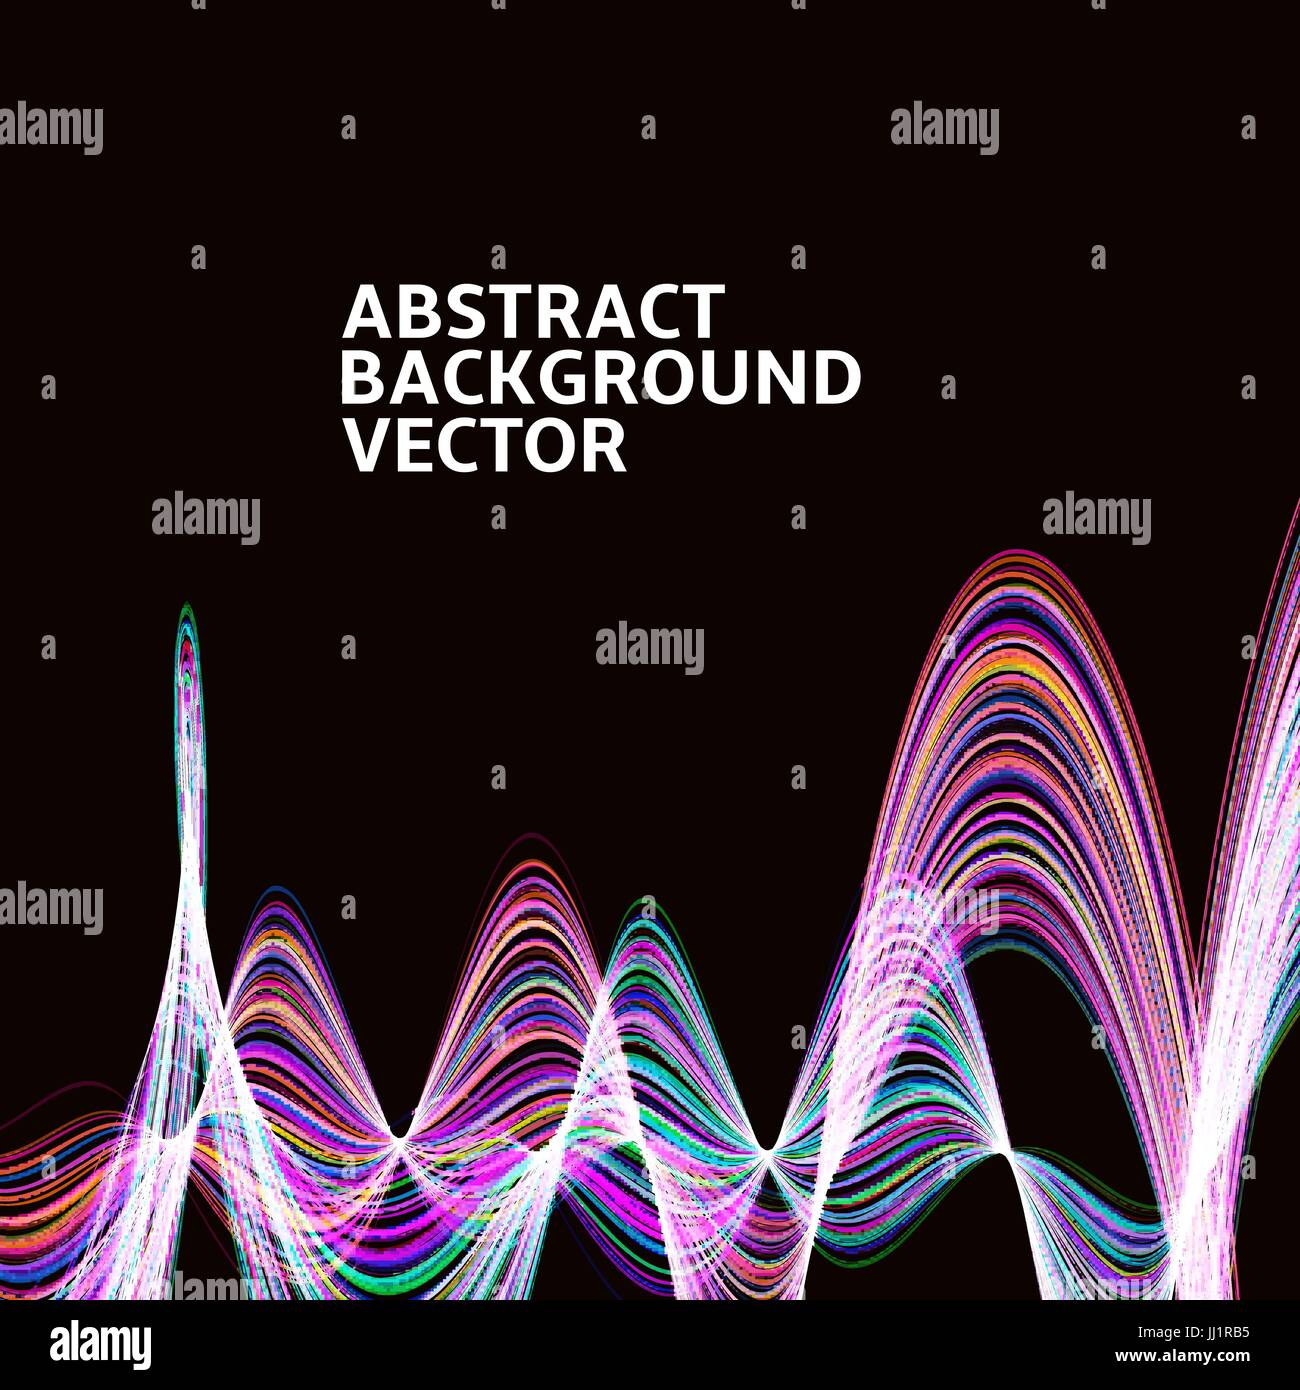 Amazing linear thread, abstract vector background template backdrop space design for posters, flyers, covers, presentations, business cards. Vector Il Stock Vector